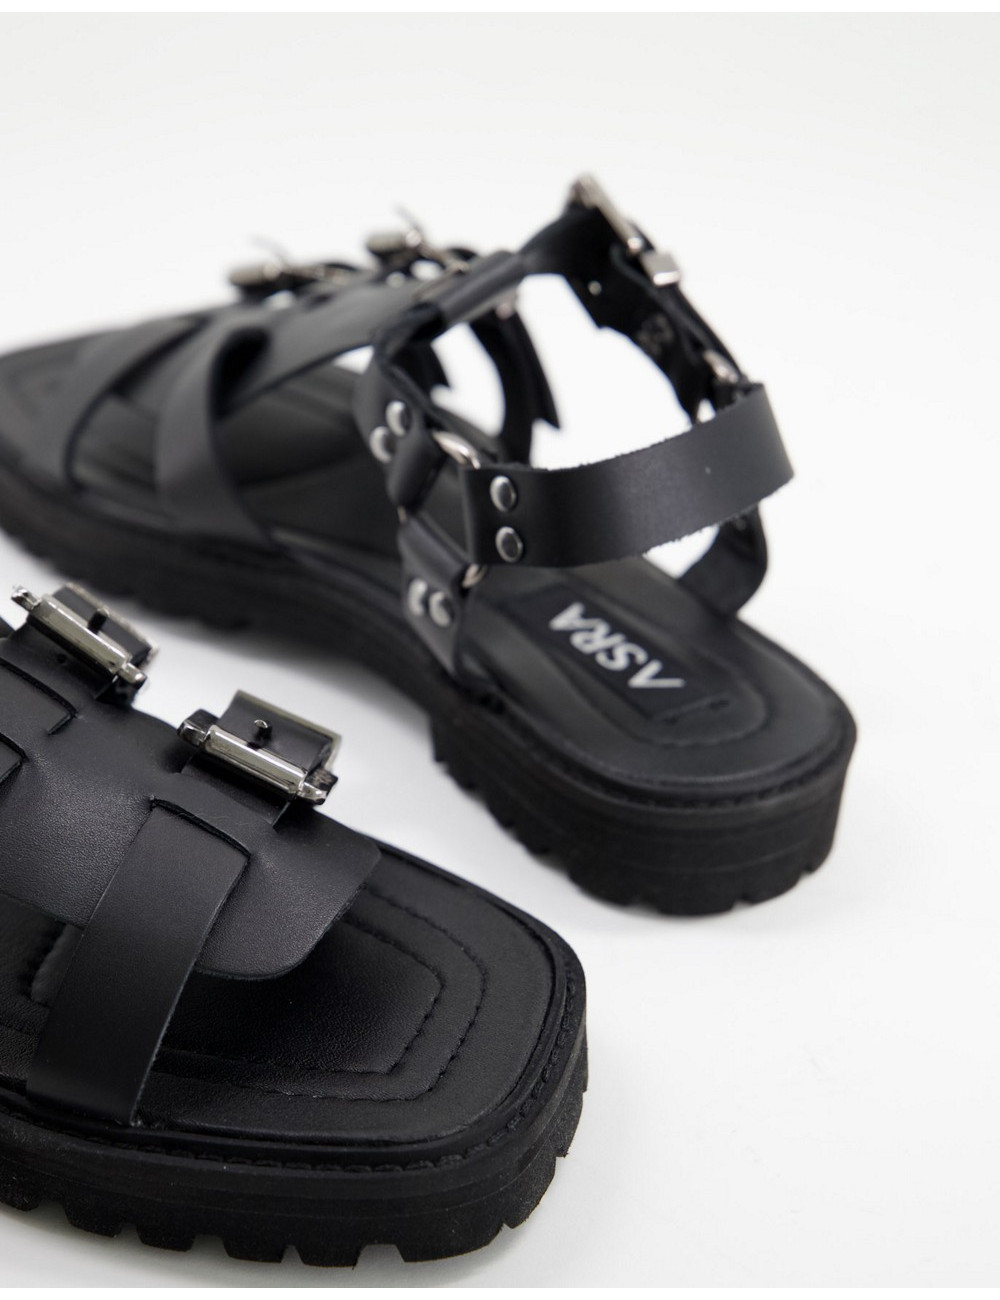 Asra spector sandals with...